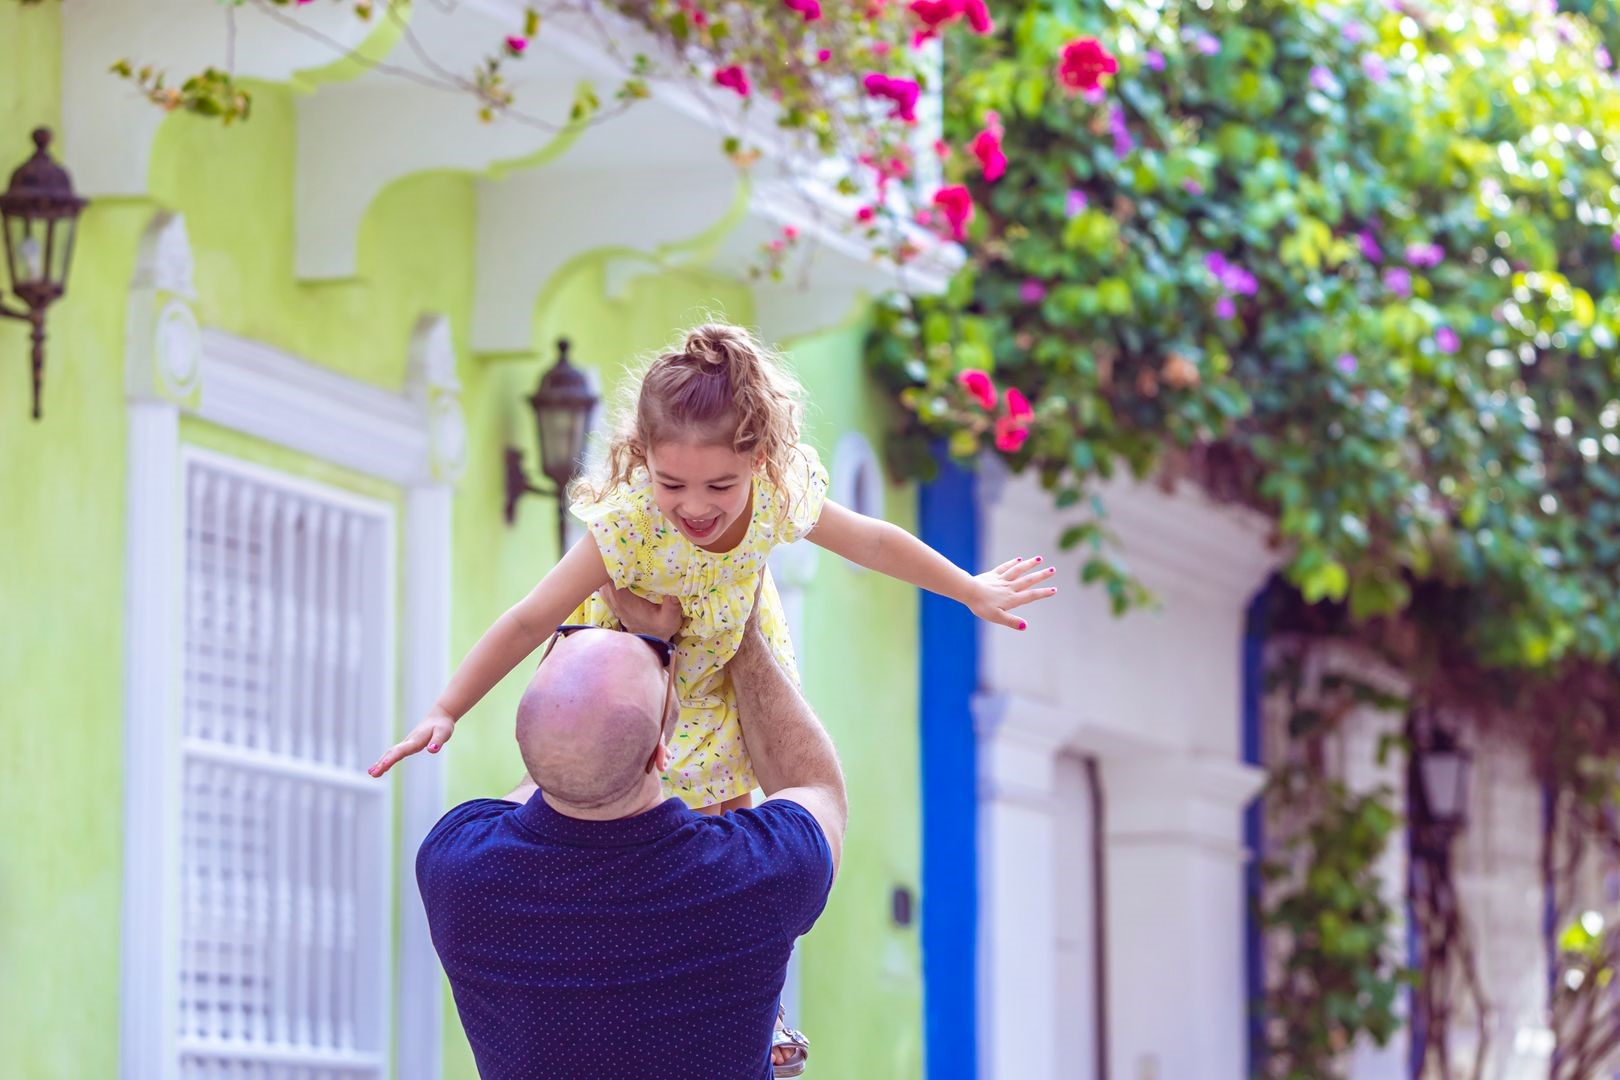 A photo of Ludo, author of the blog post, lifting his child up, who is smiling at him. In the background there are brightly colored houses and flowers.